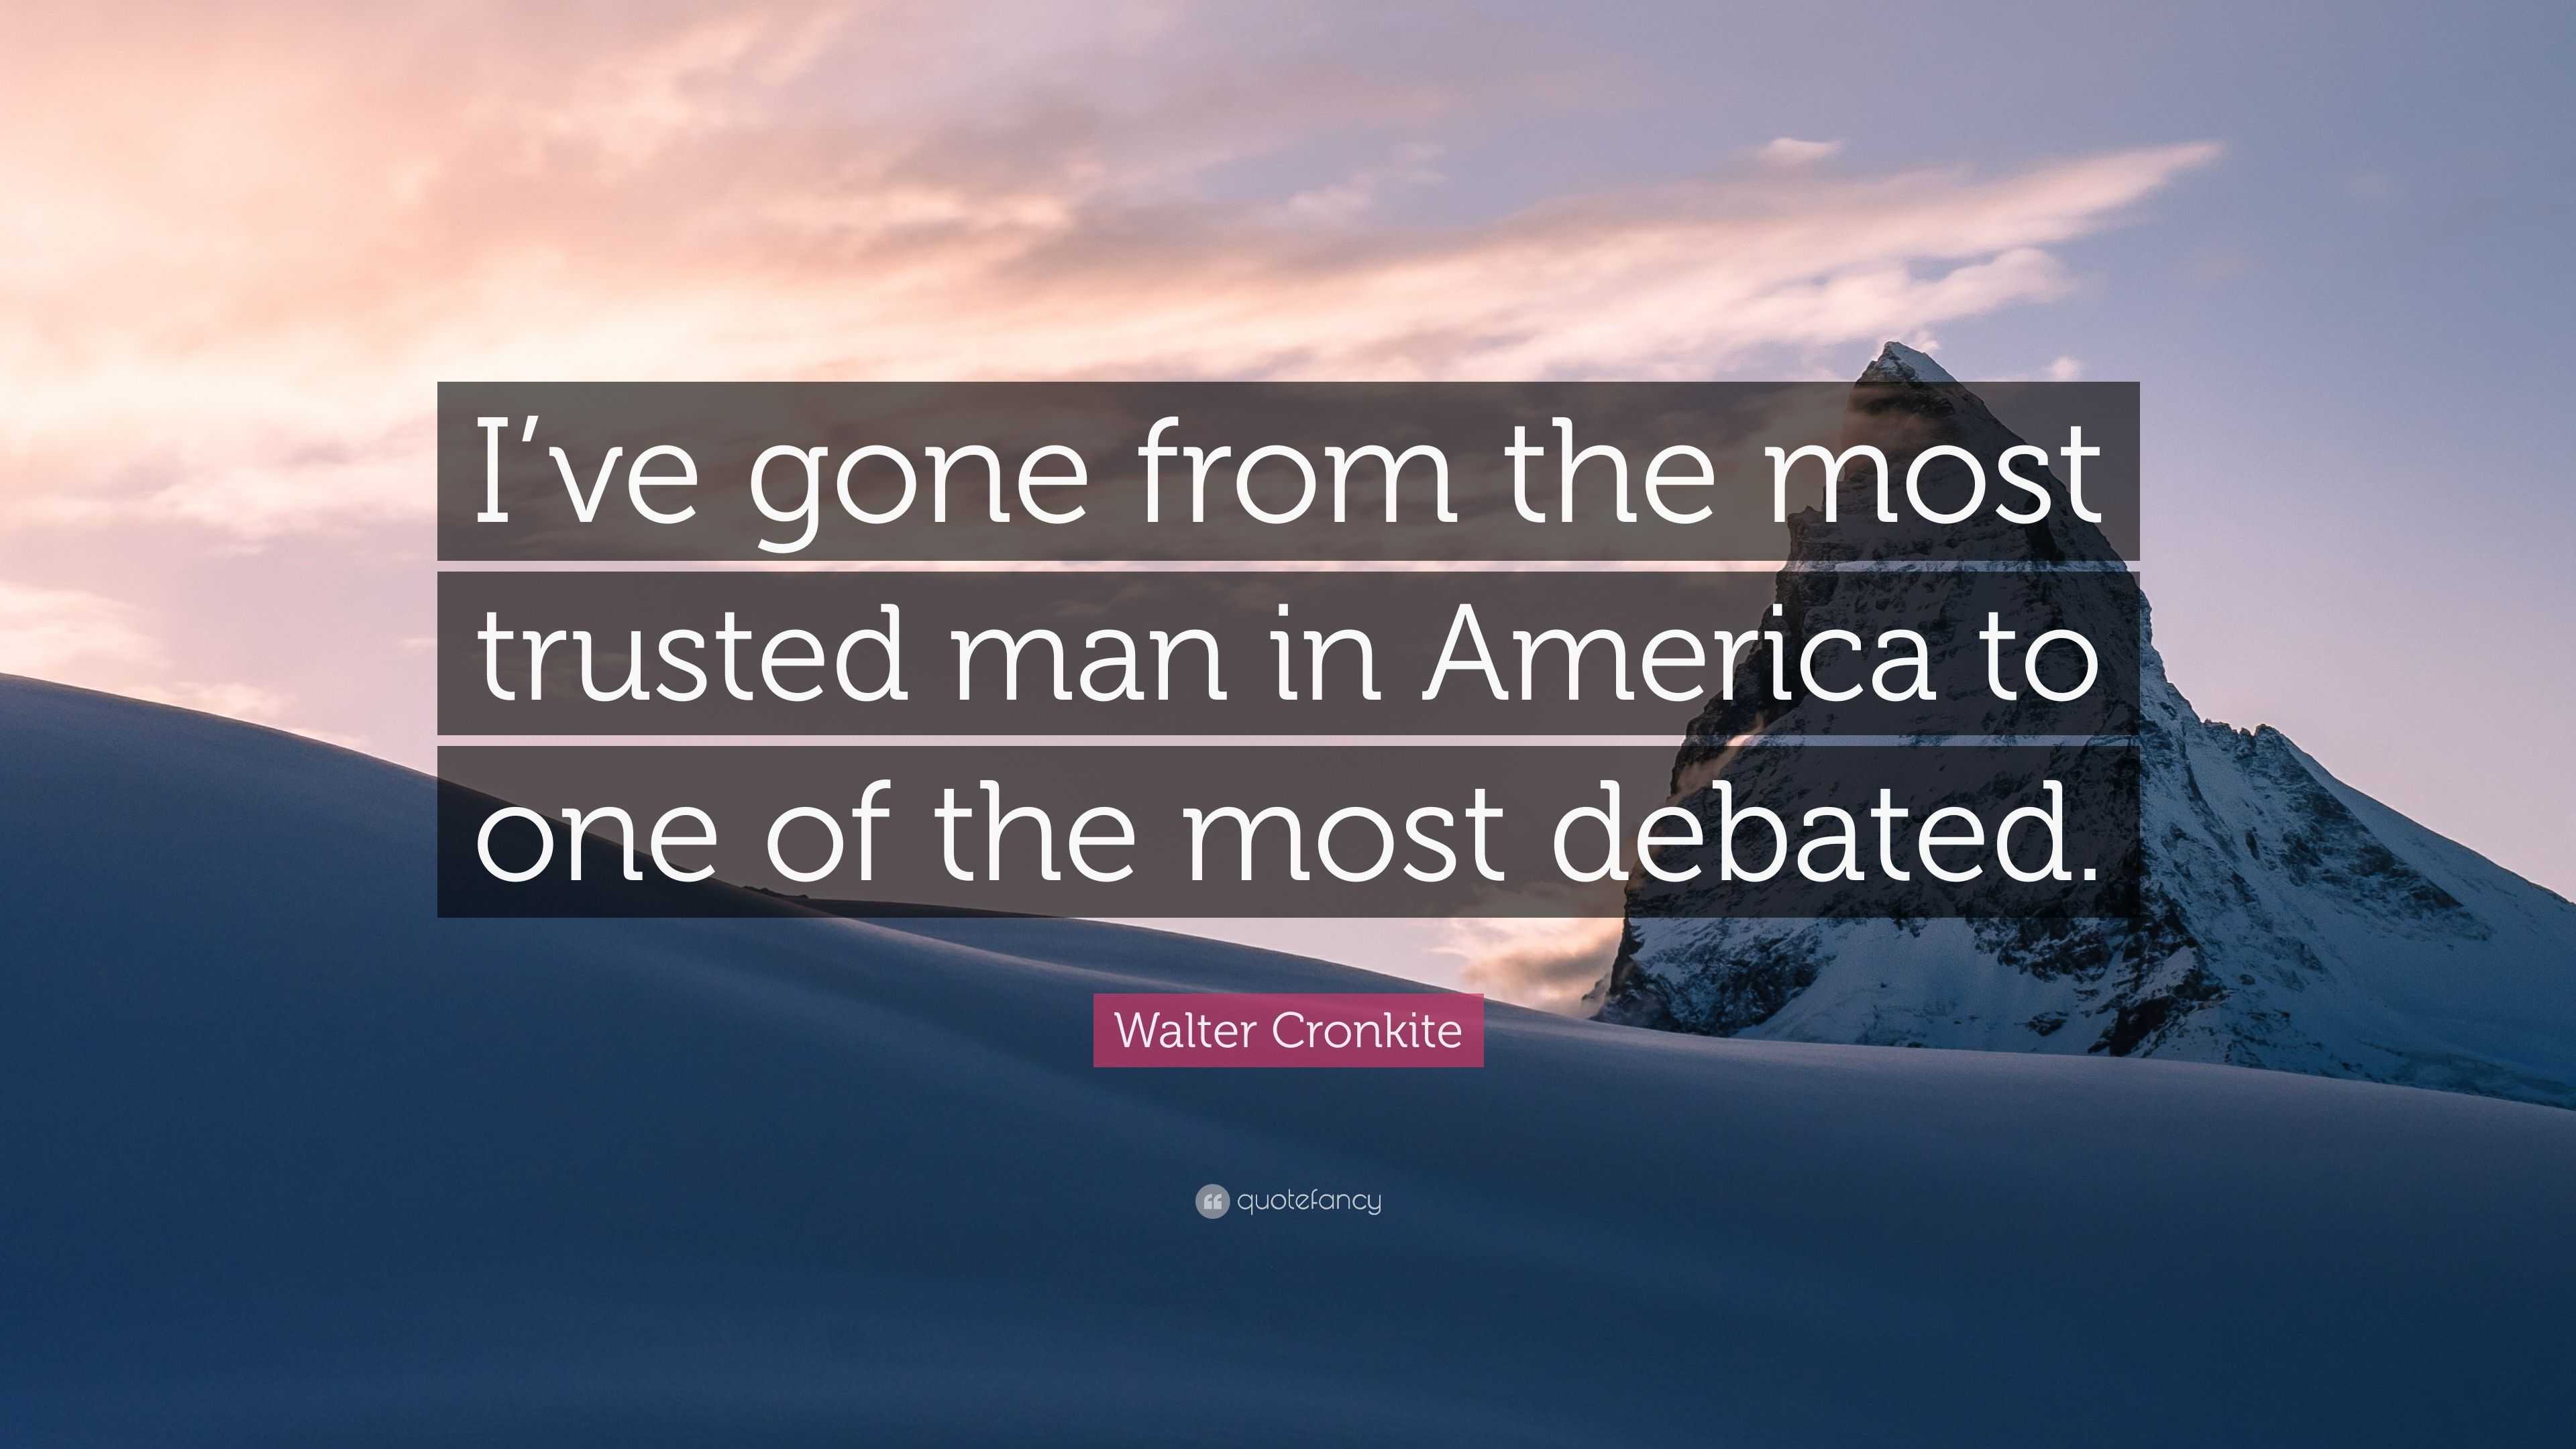 Walter Cronkite Quote “I’ve gone from the most trusted man in America